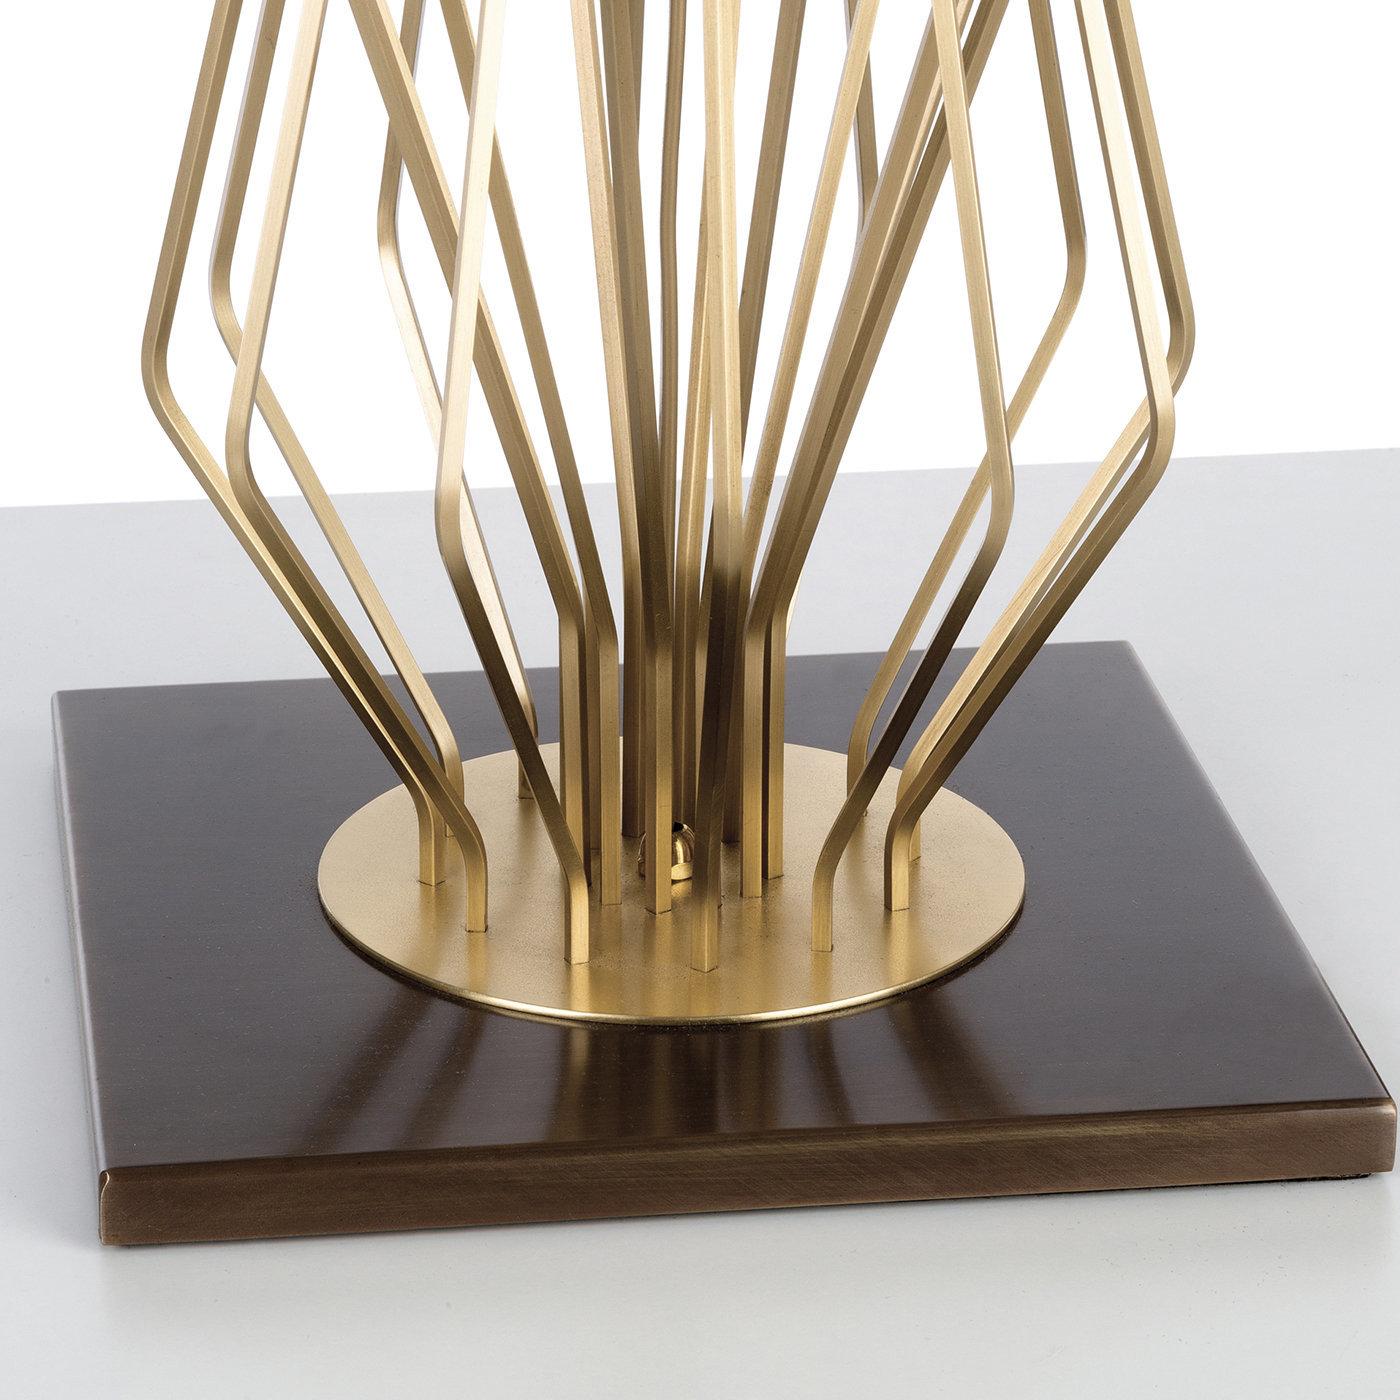 Part of the Saba collection, this table lamp features a contemporary design that is striking to behold and will make a statement in a modern decor. Its standout piece is the body, resting on a bronzed brass square base and made up of a multitude of